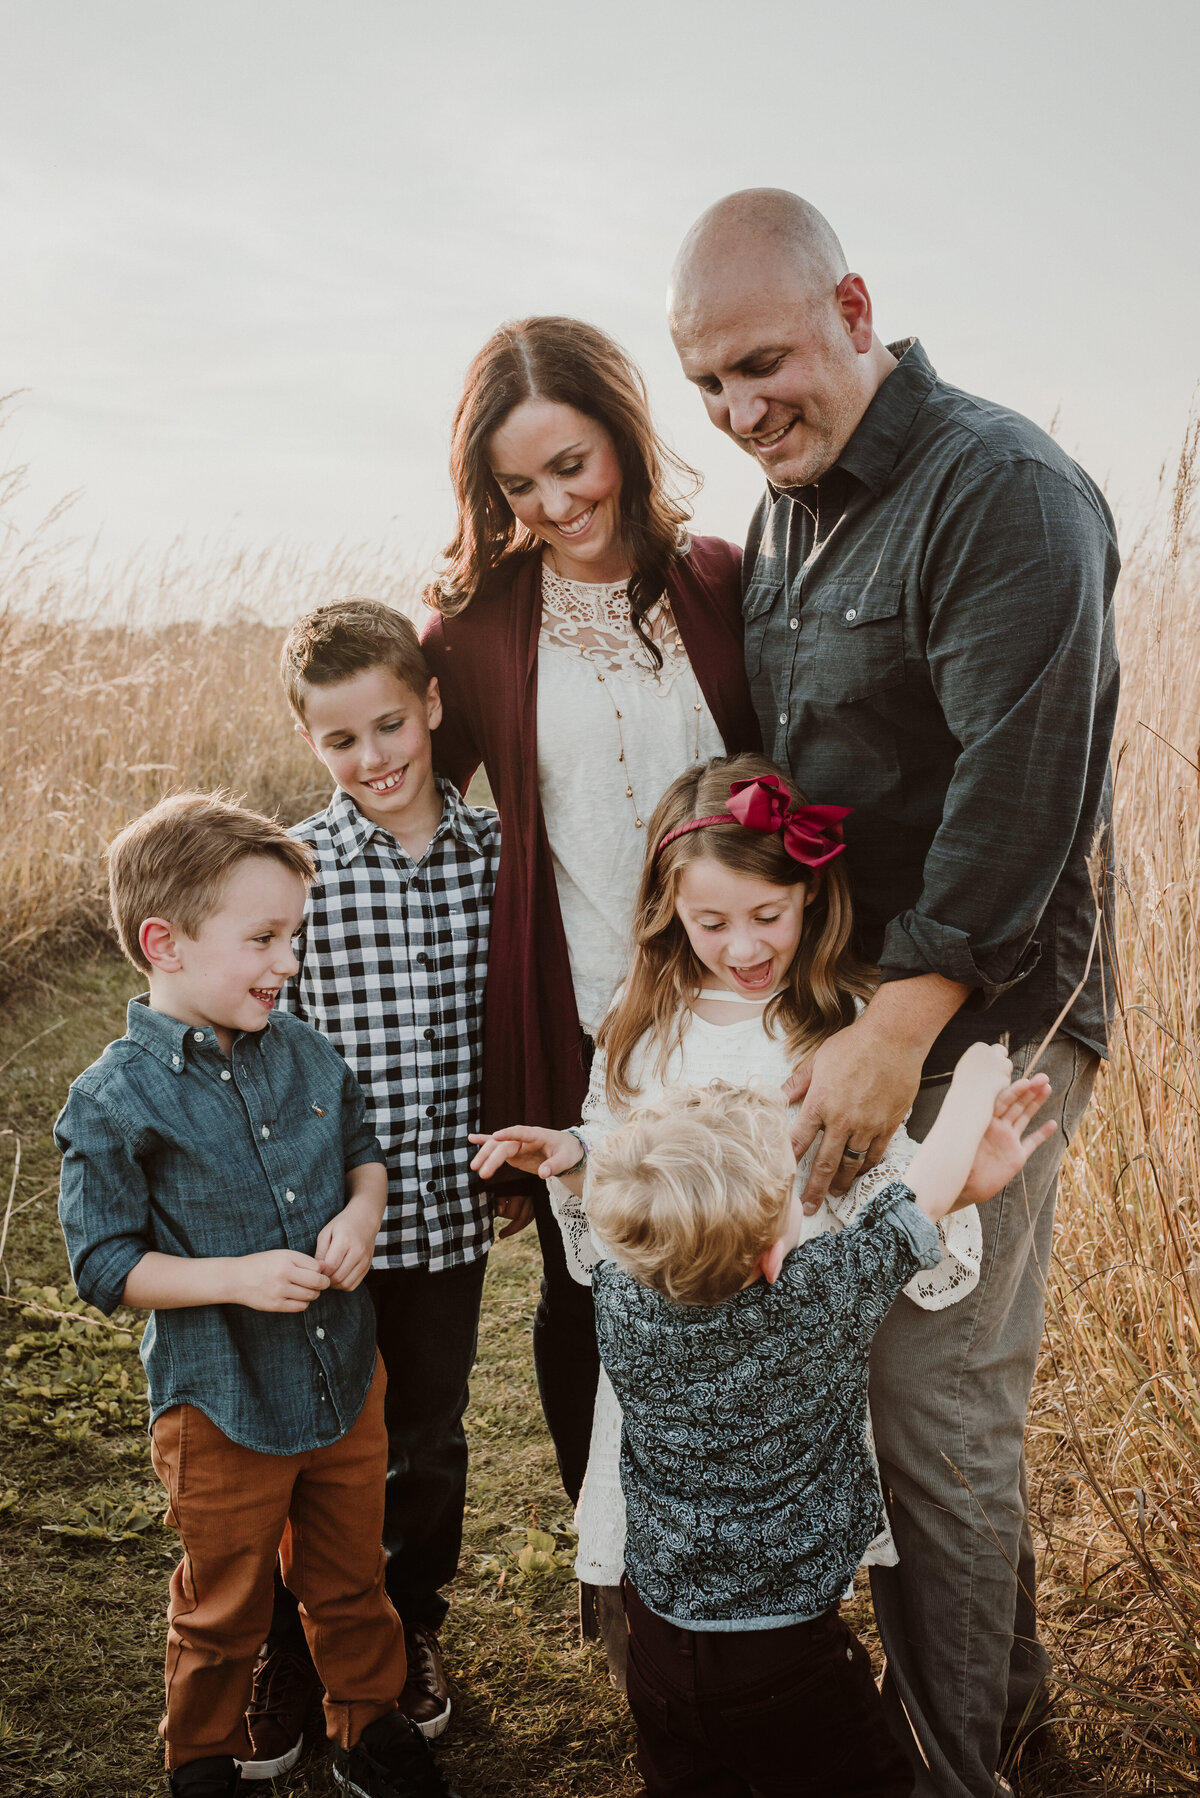 Experience sunlit joy in St. Paul family portraits by Shannon Kathleen Photography. Let every smile and laugh be a testament to your family's happiness. Book now!